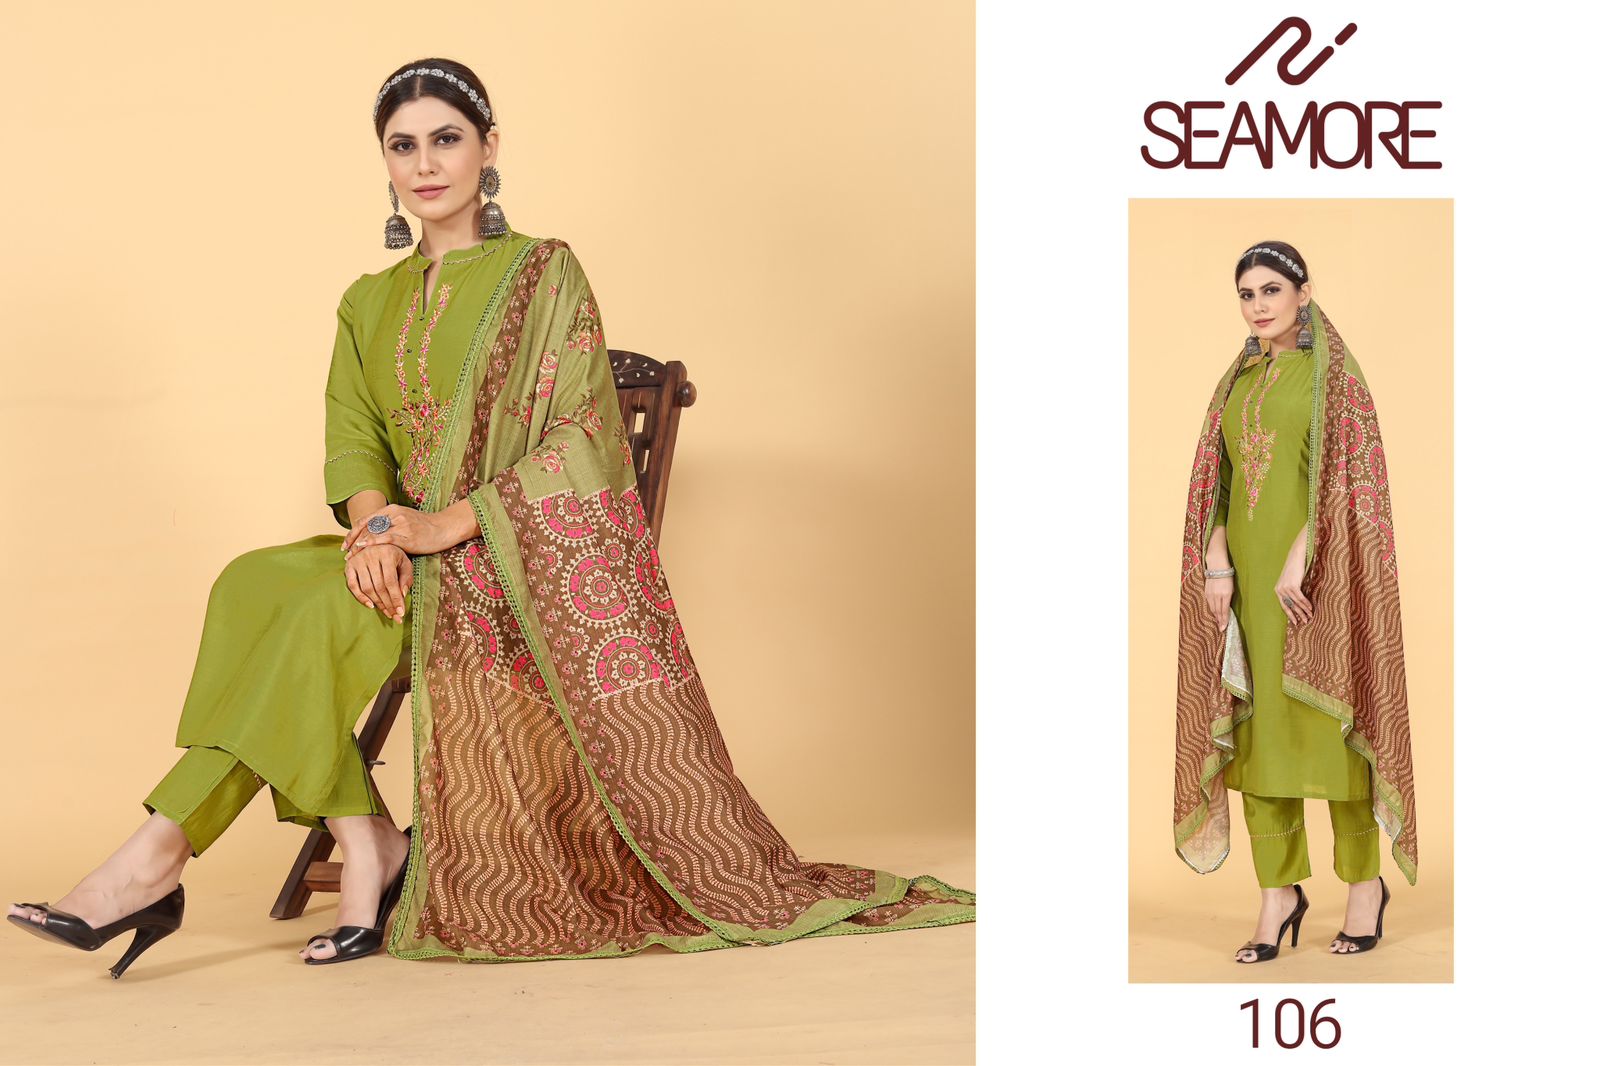 106-107 Seamore Chanderi Readymade Pant Style Suits